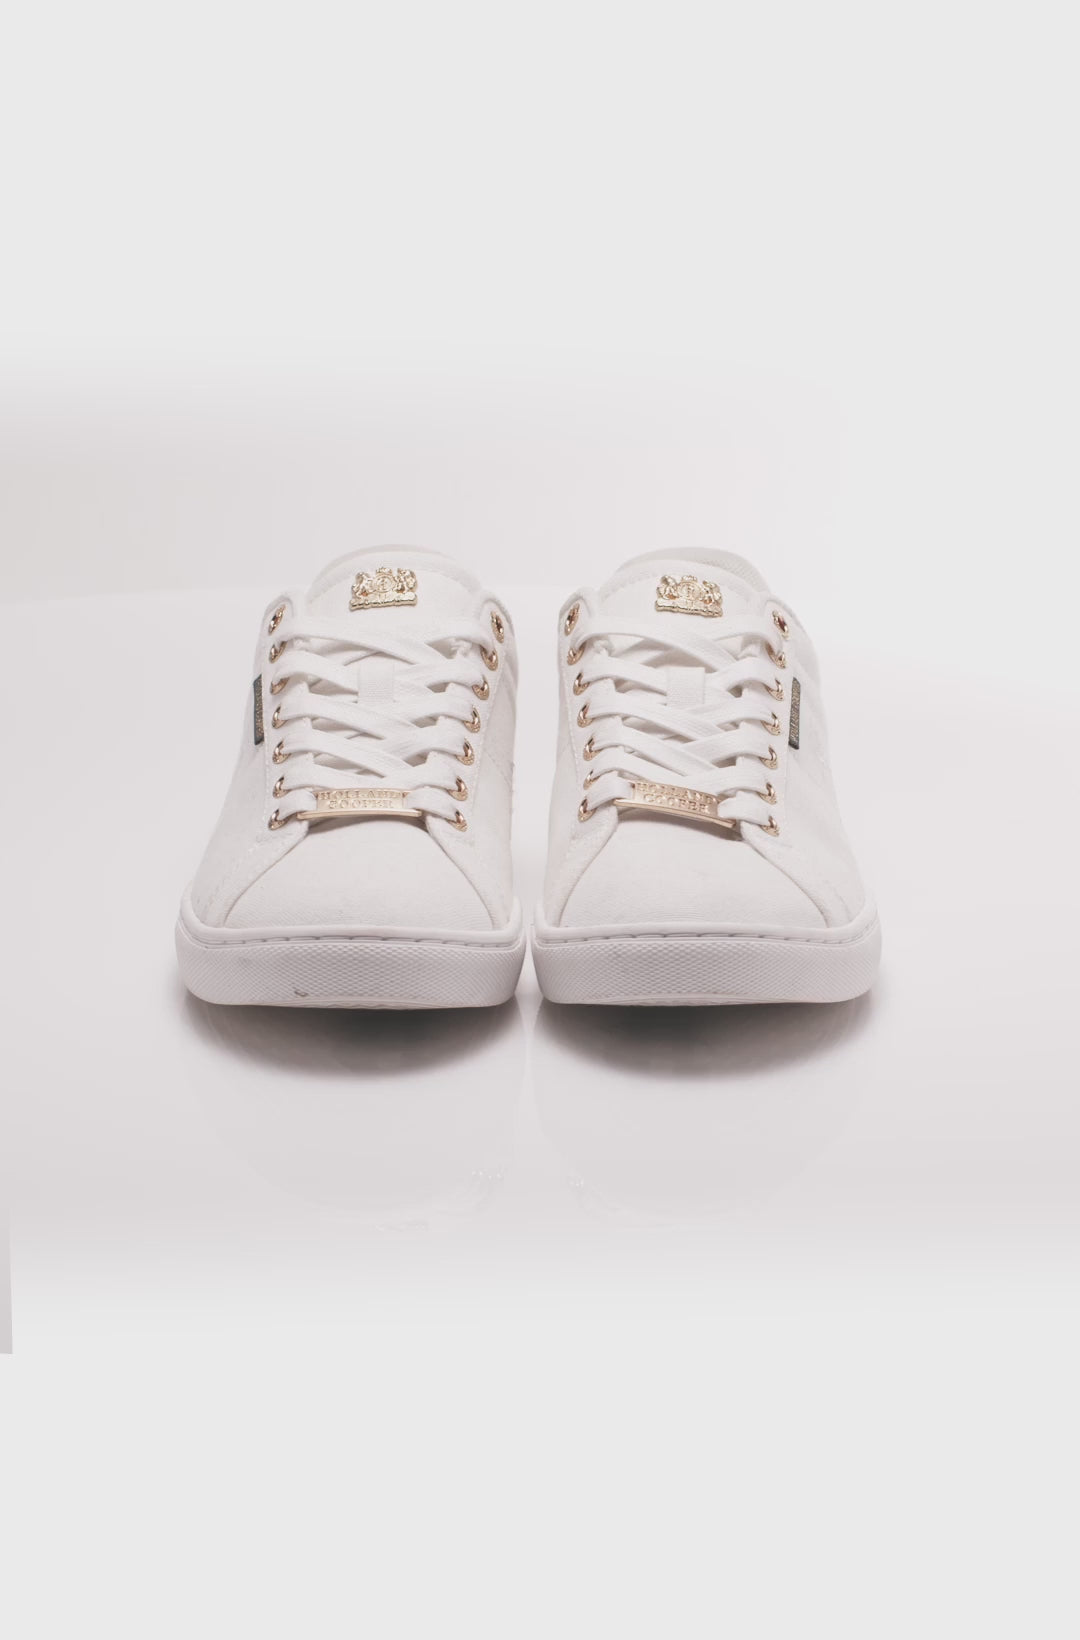 Holland Cooper Chelsea Court Ladies Trainers - White